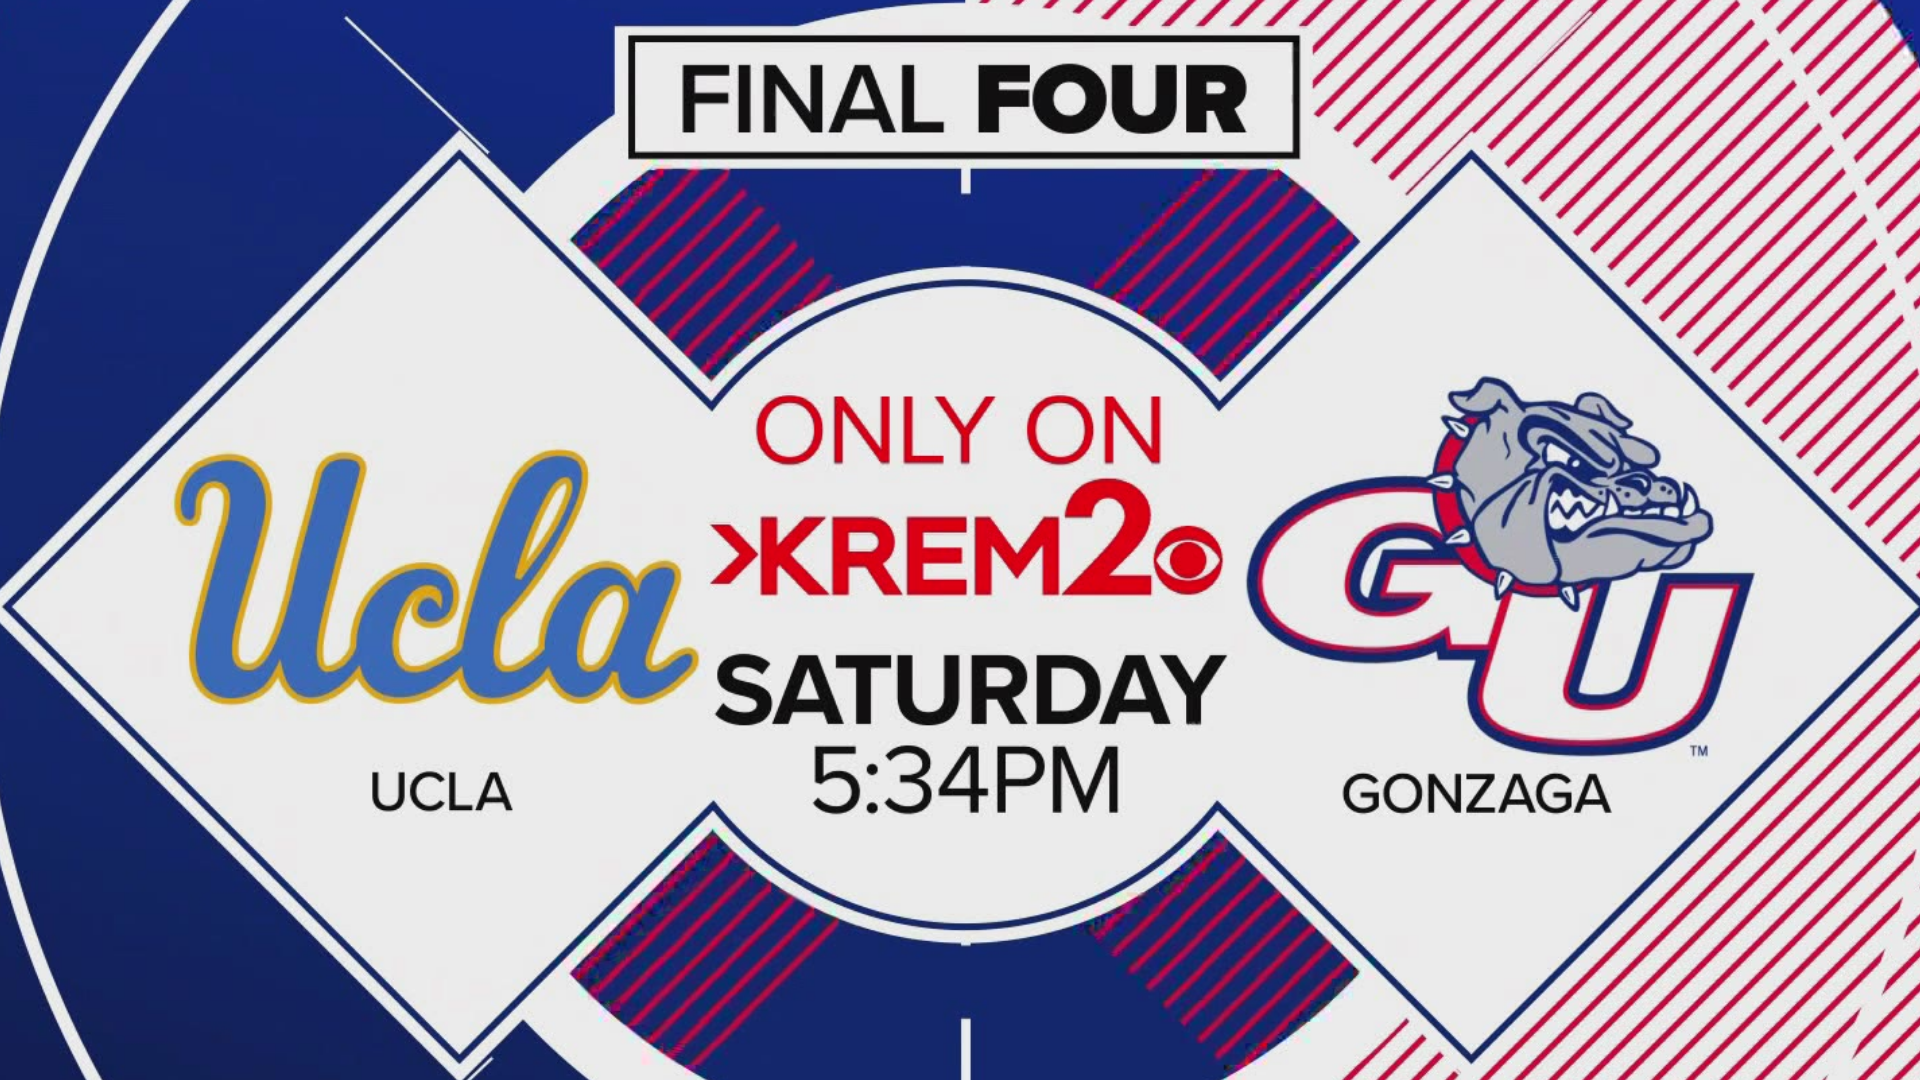 Part 1 of Gonzaga’s Bulldog Madness Special before the Final Four on April 3, 2021.